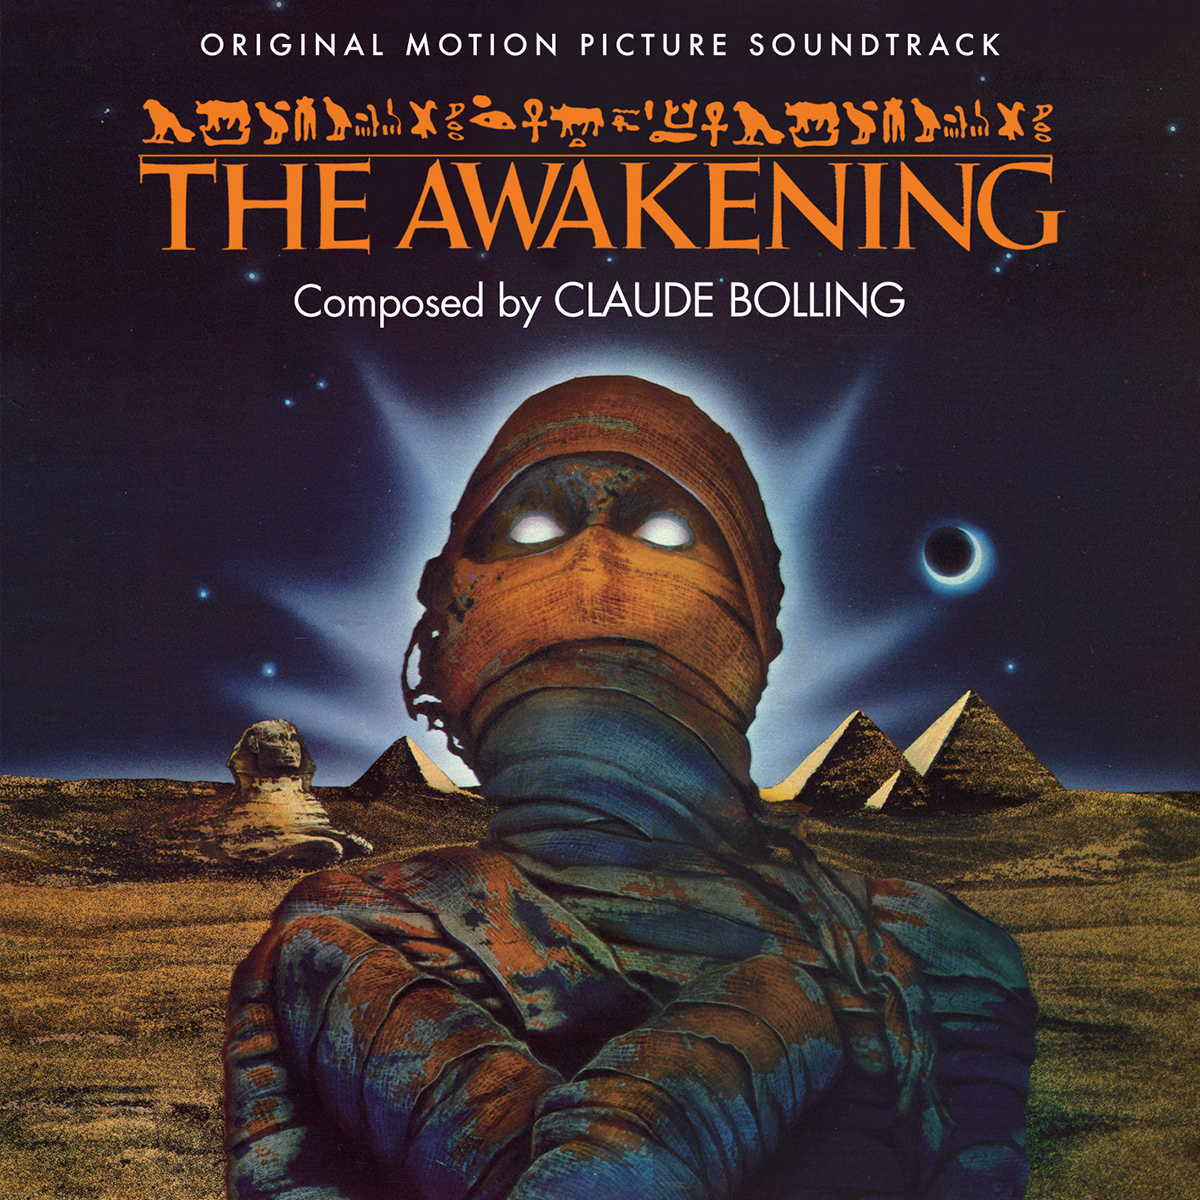 The Awakening (Re-issue re-mastered and re-sequenced)